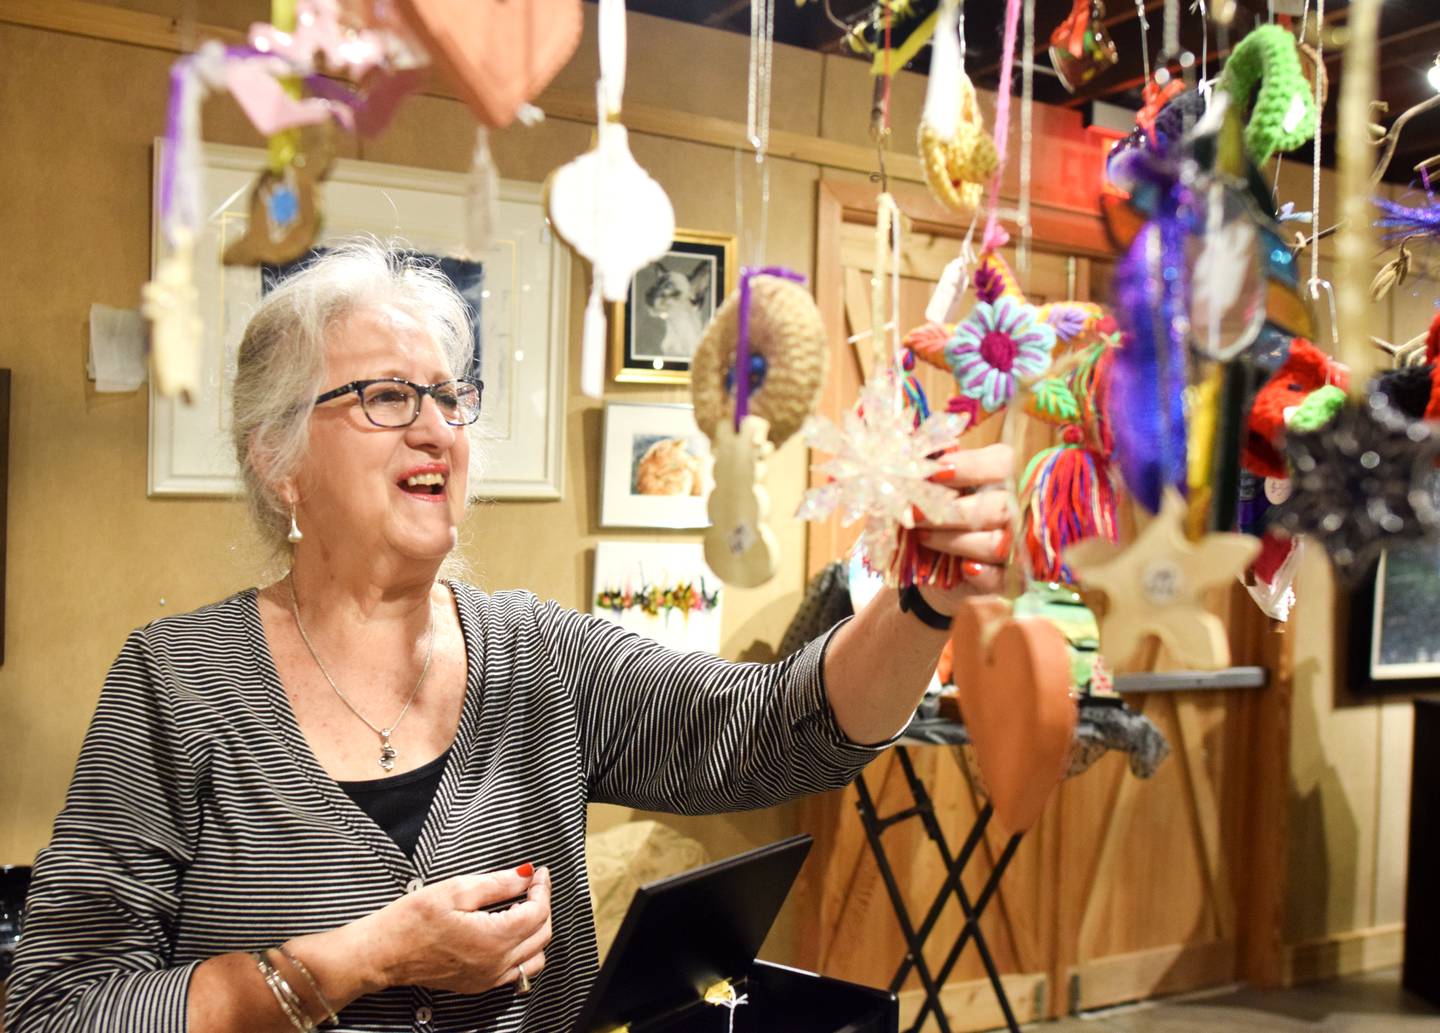 Terri Ayres, volunteer manager of the Geisler-Penquite Gift Shop at the Center for Arts & Artists, showcases the many handmade and donated items for sale at the store, the proceeds of which benefit creative-based programming and projects for youth.